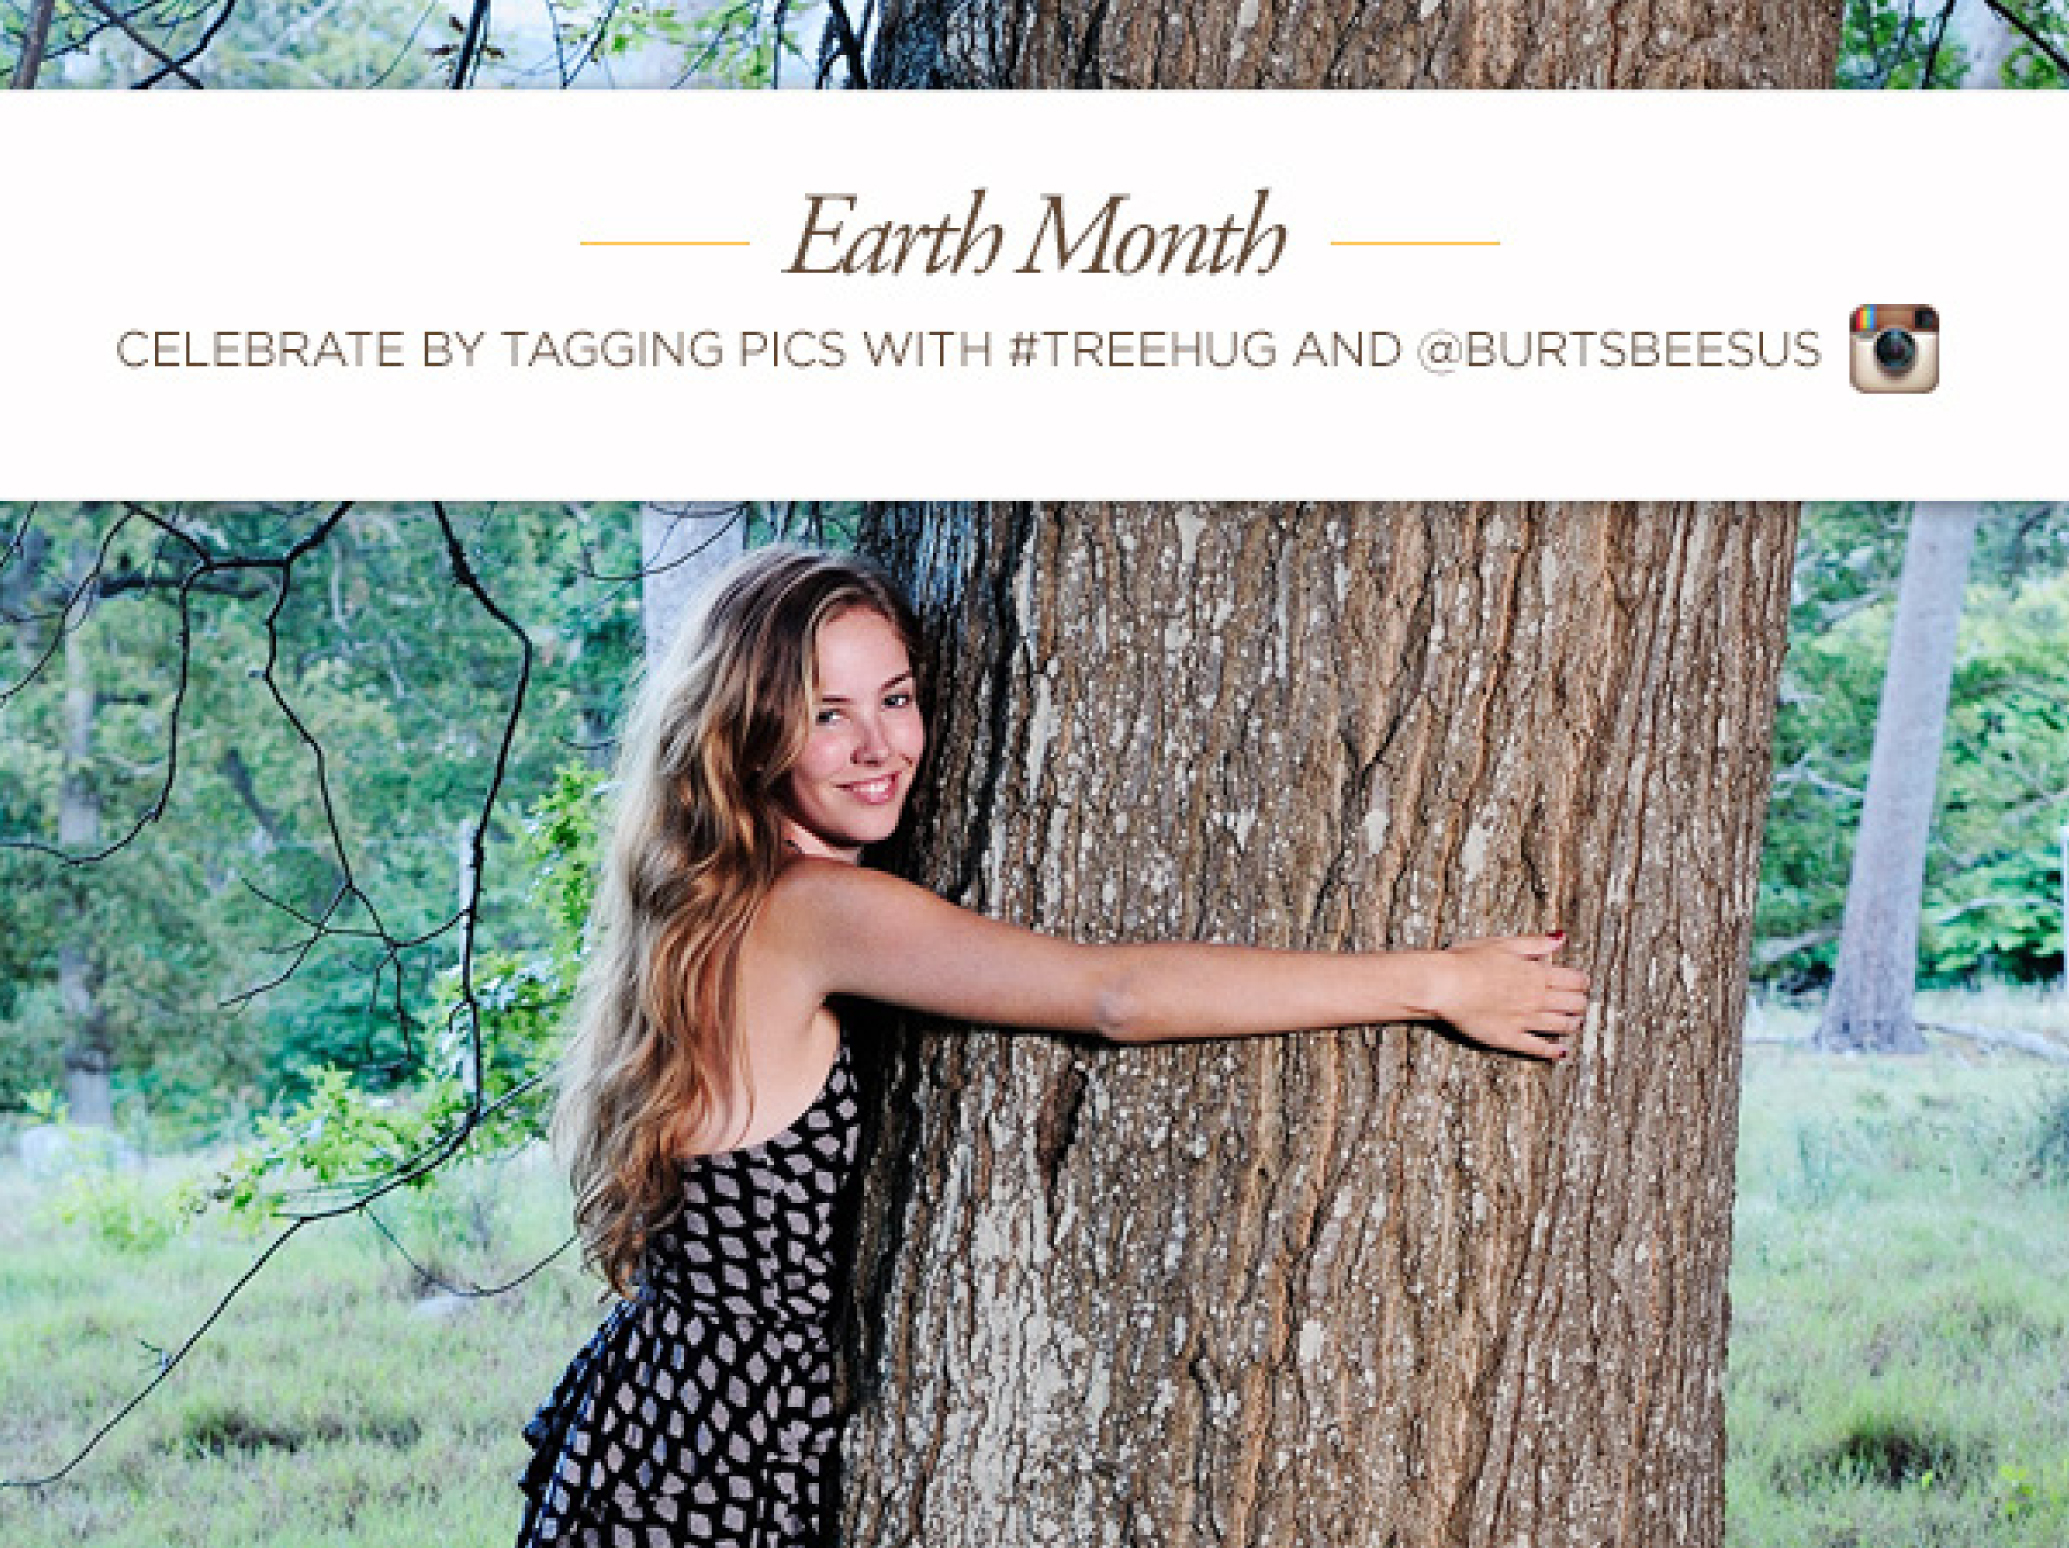  POST COPY: Shake off those winter woes and celebrate #earthmonth by taking yourself outside! You’ll probably be so happy that you’ll want to hug a tree. Don’t fight the urge. Go on with the hugging, take a pic, and tag us. We’ll do our part by plant